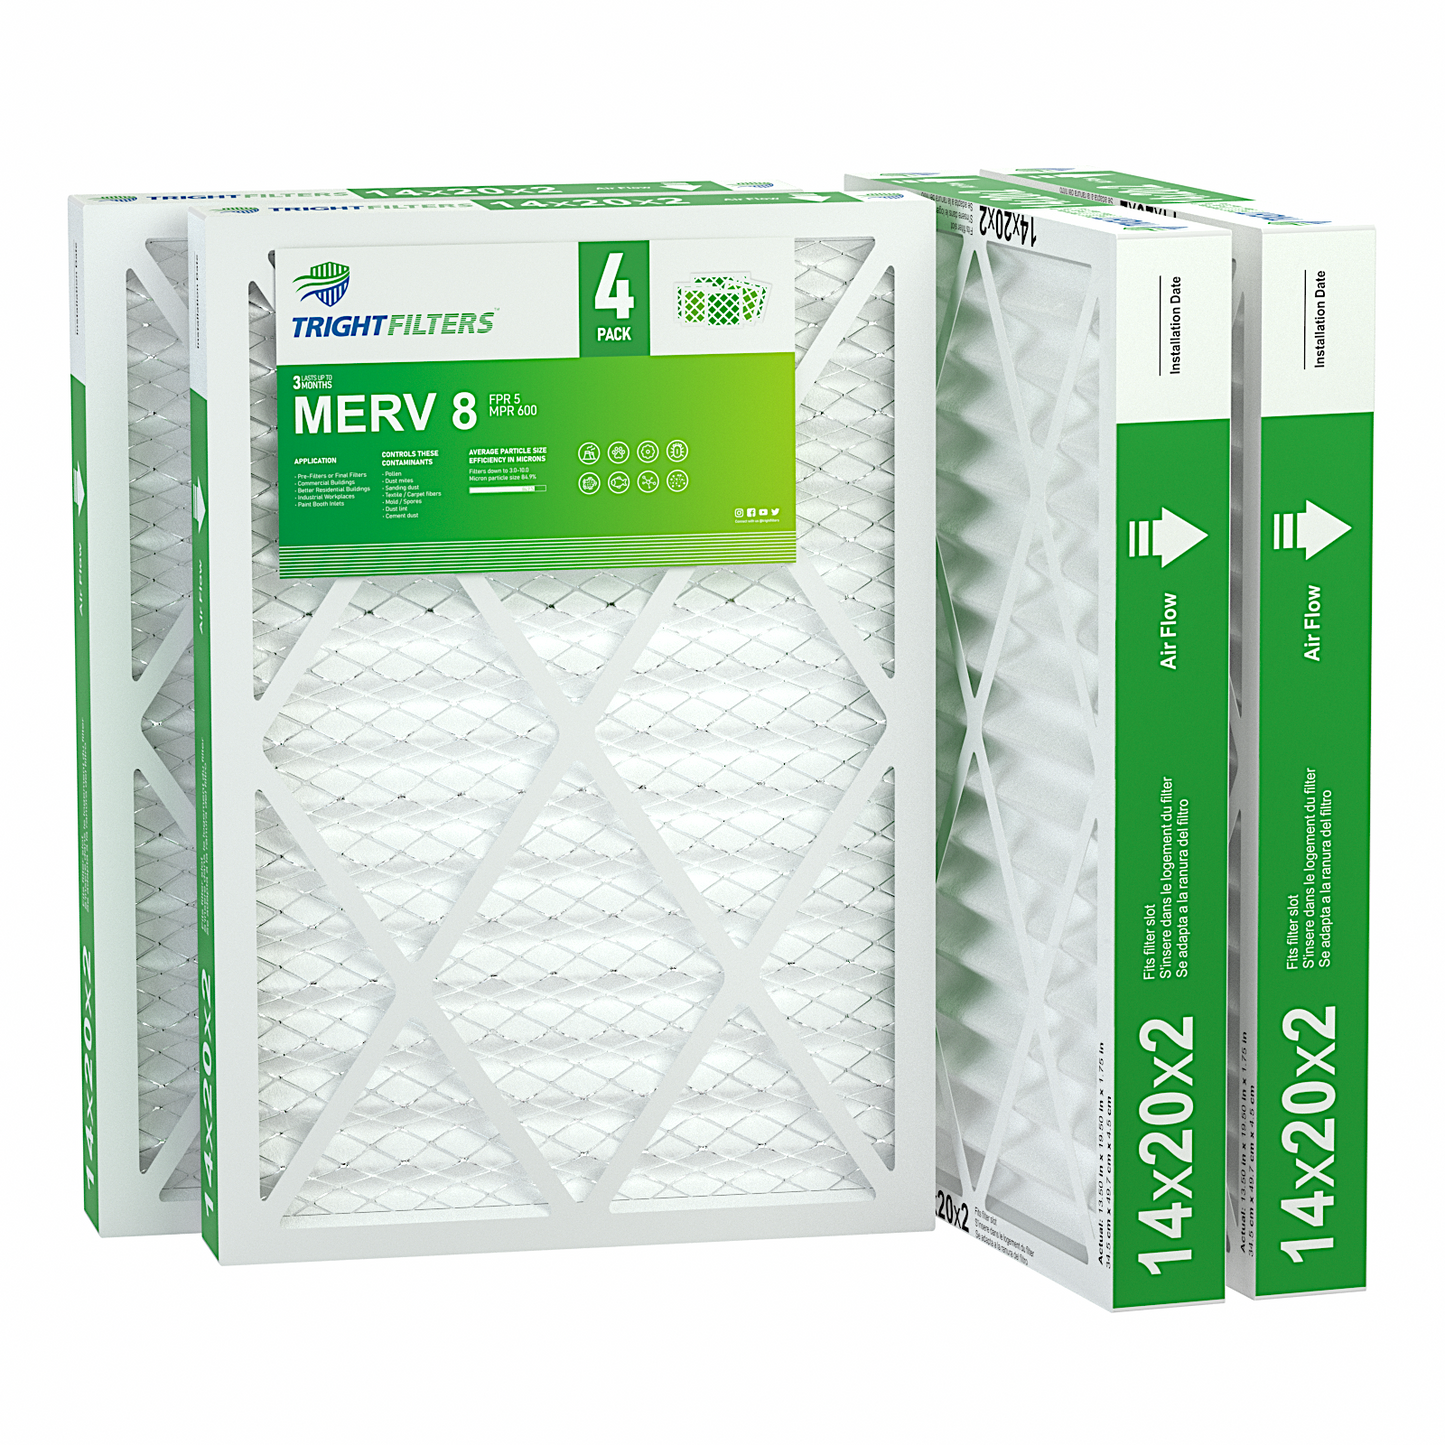 4 Pack of 14x20x2 Air Filter